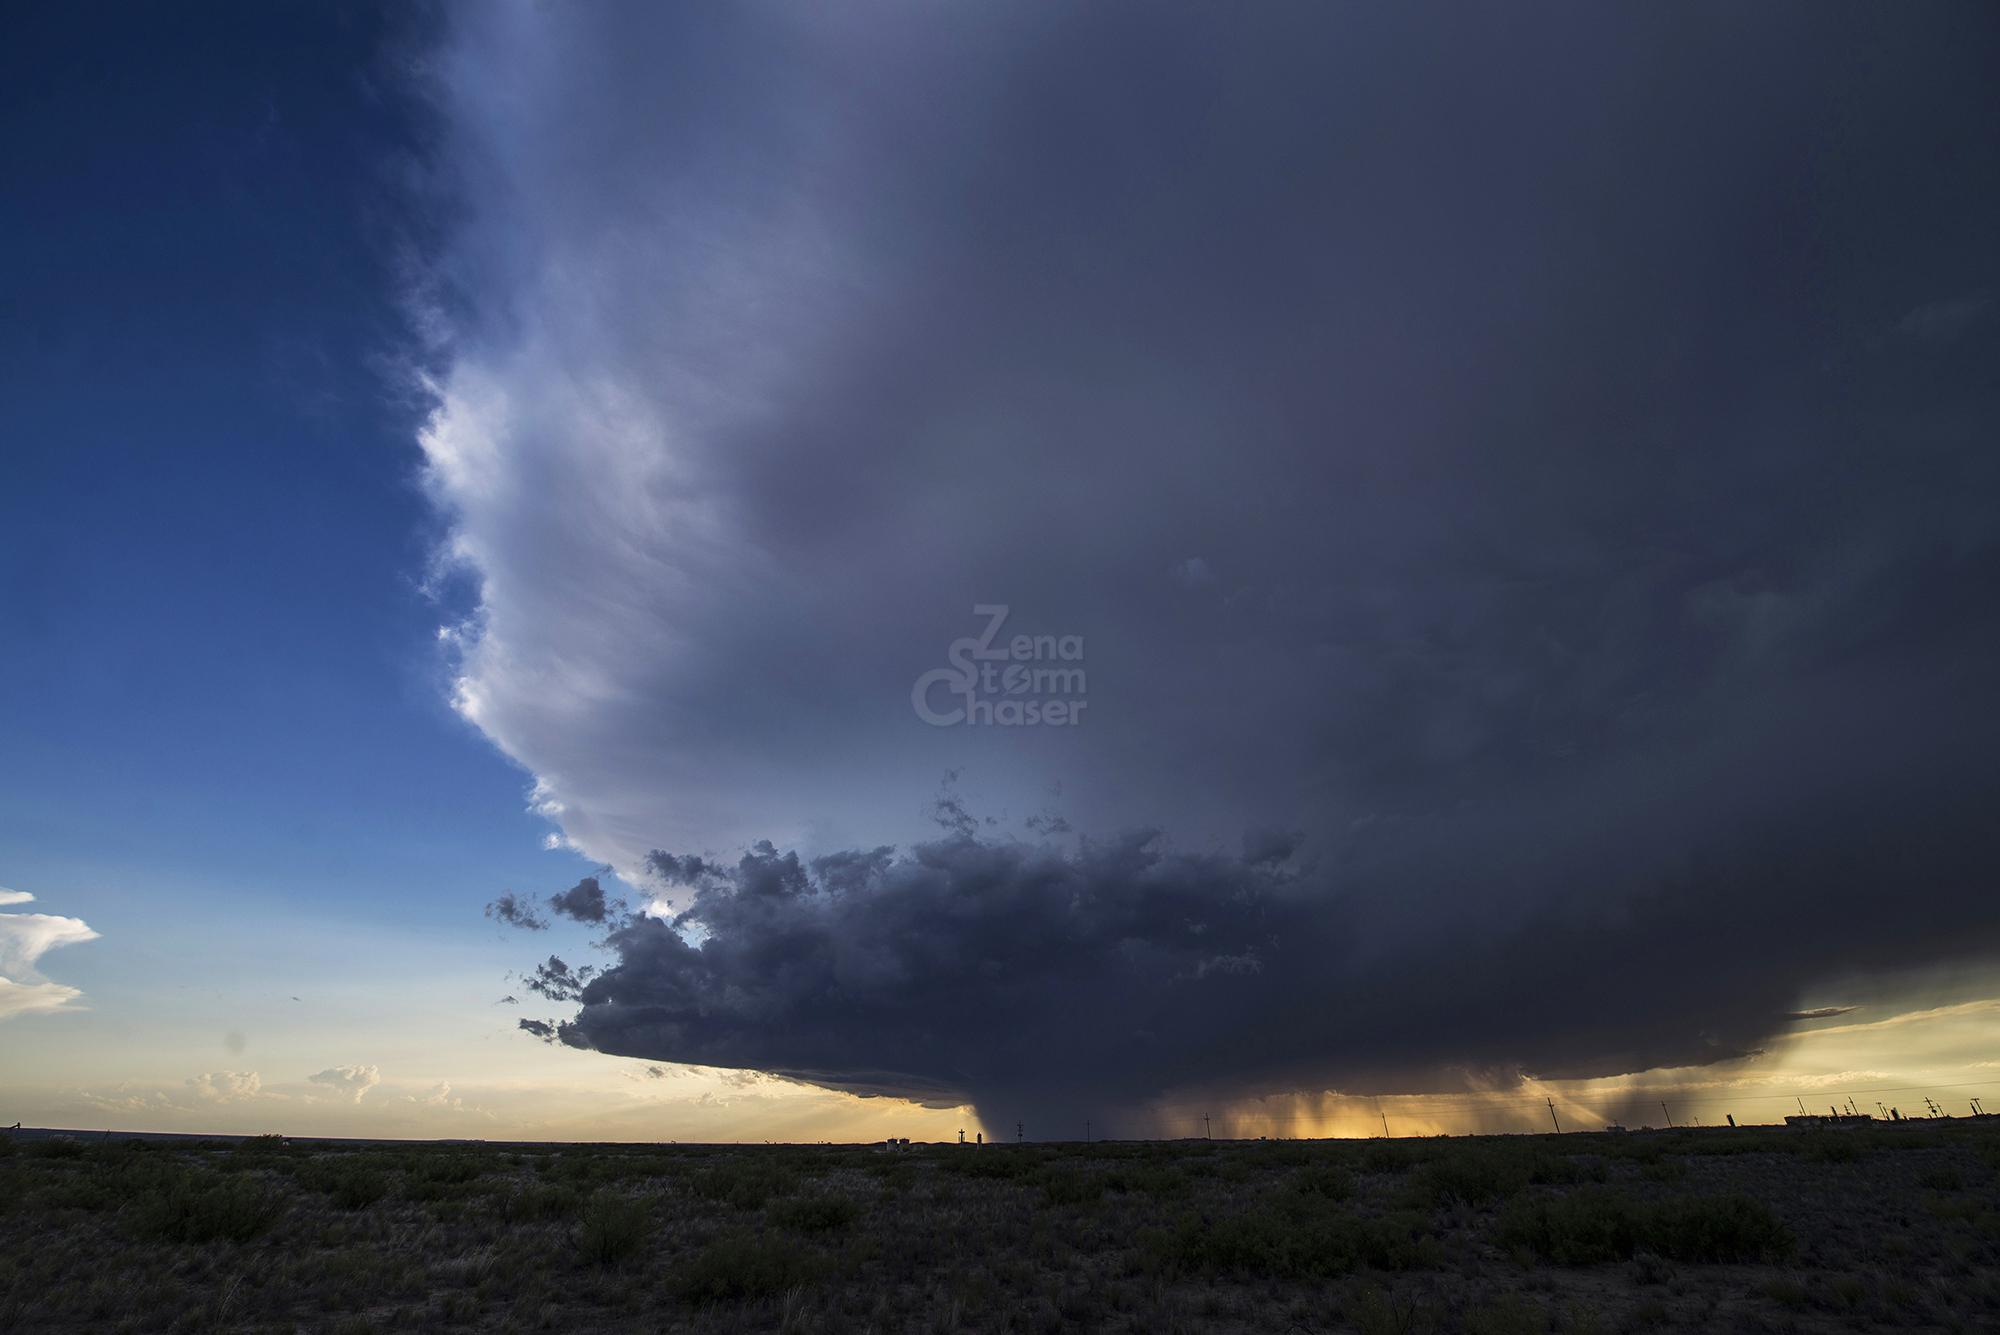 Obbs supercells New Messico – 25 may 2014